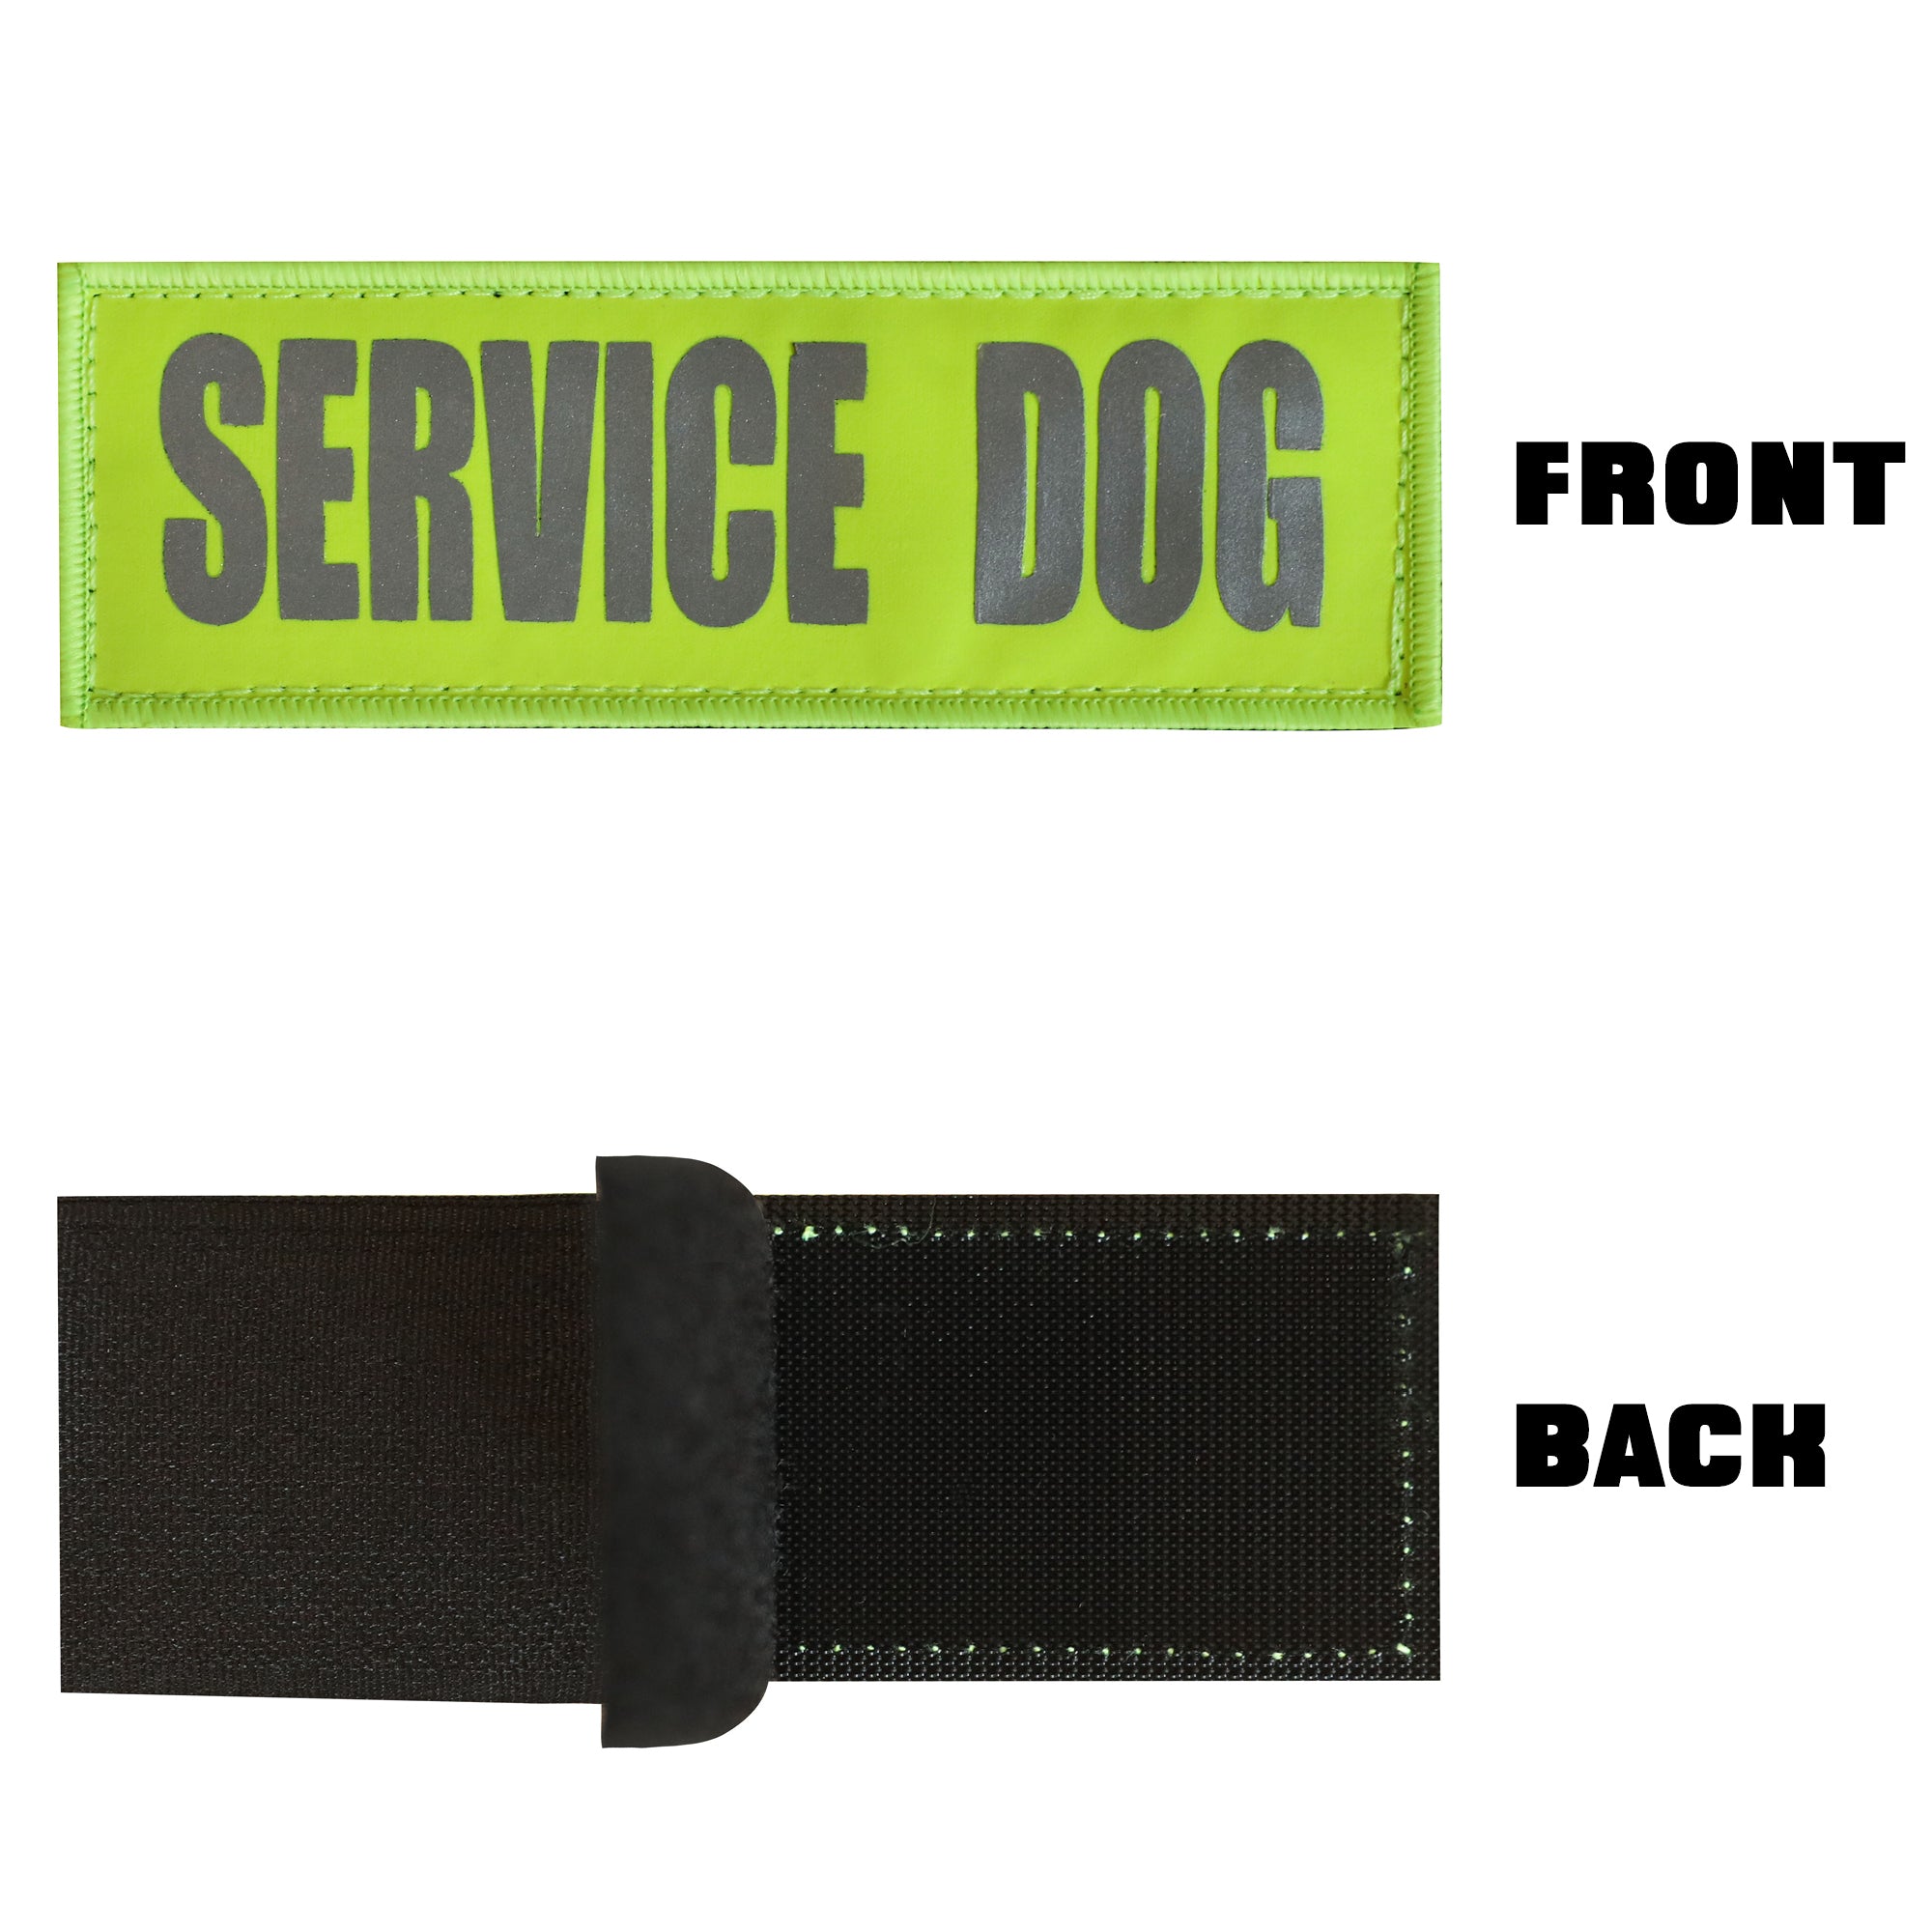 8 Patches in 1 Set, Personalized Patches and Reflective for Dog